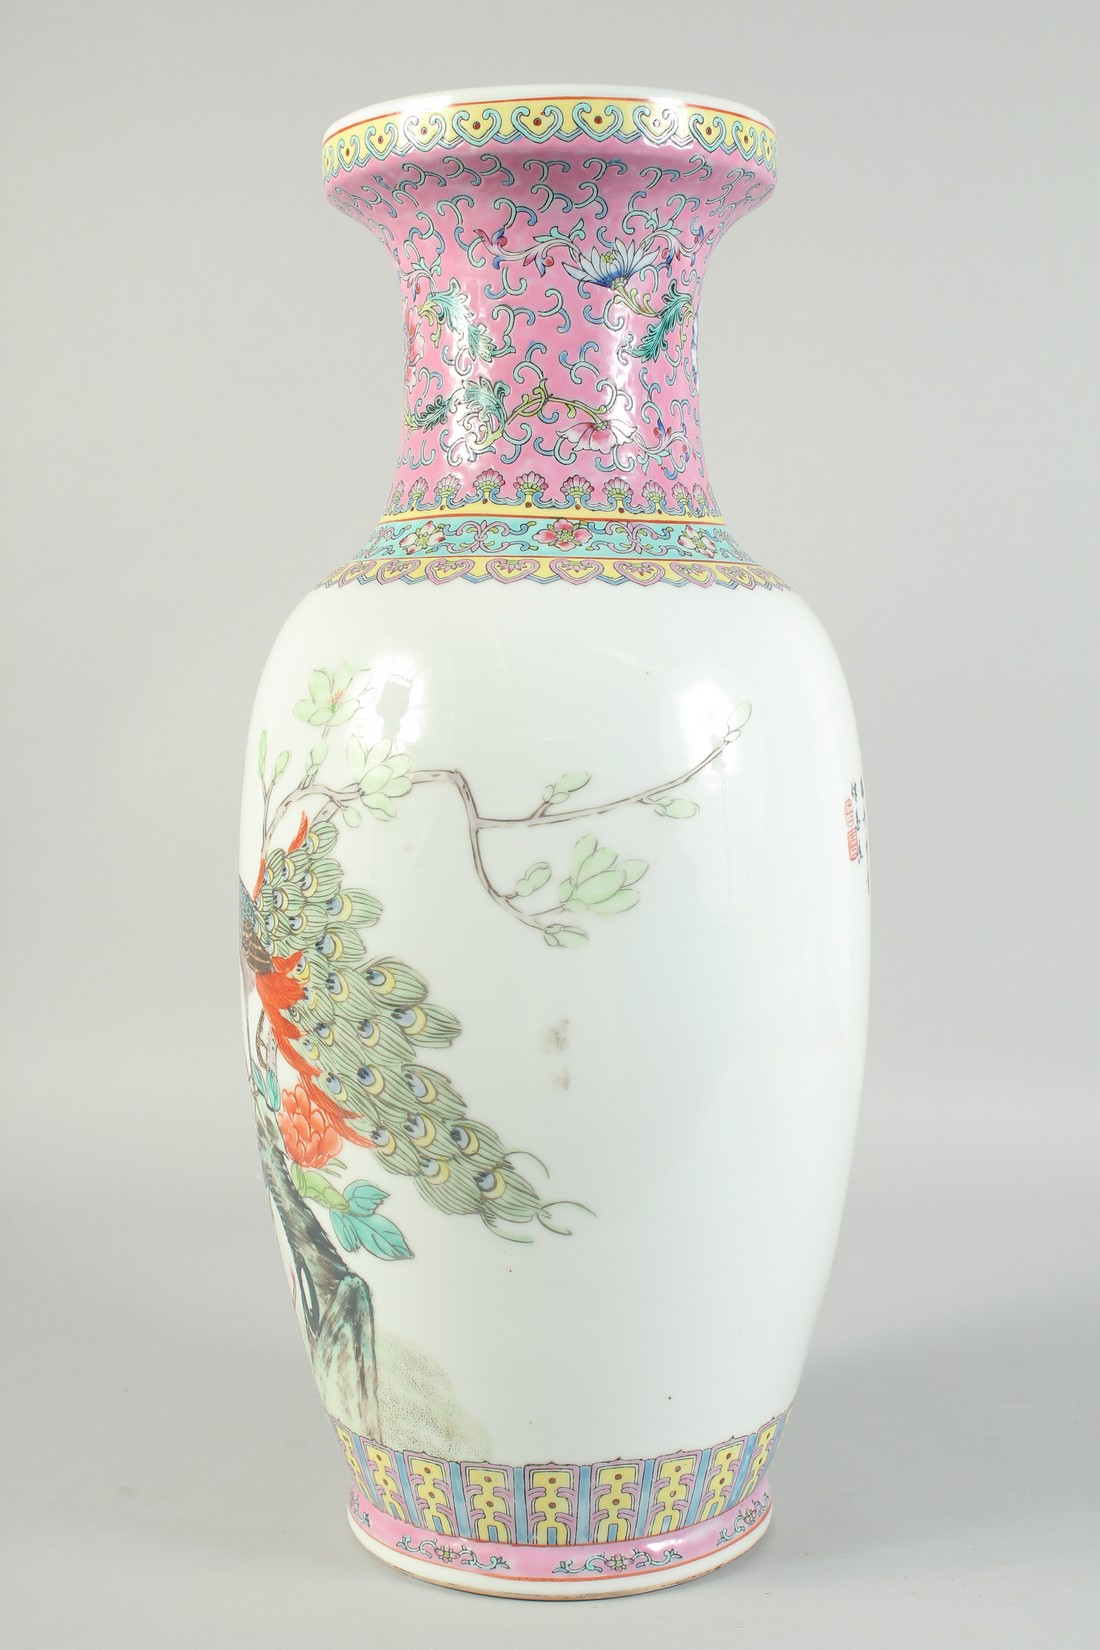 A CHINESE PORCELAIN REPUBLIC VASE with birds and calligraphy. 19ins high. - Image 4 of 5